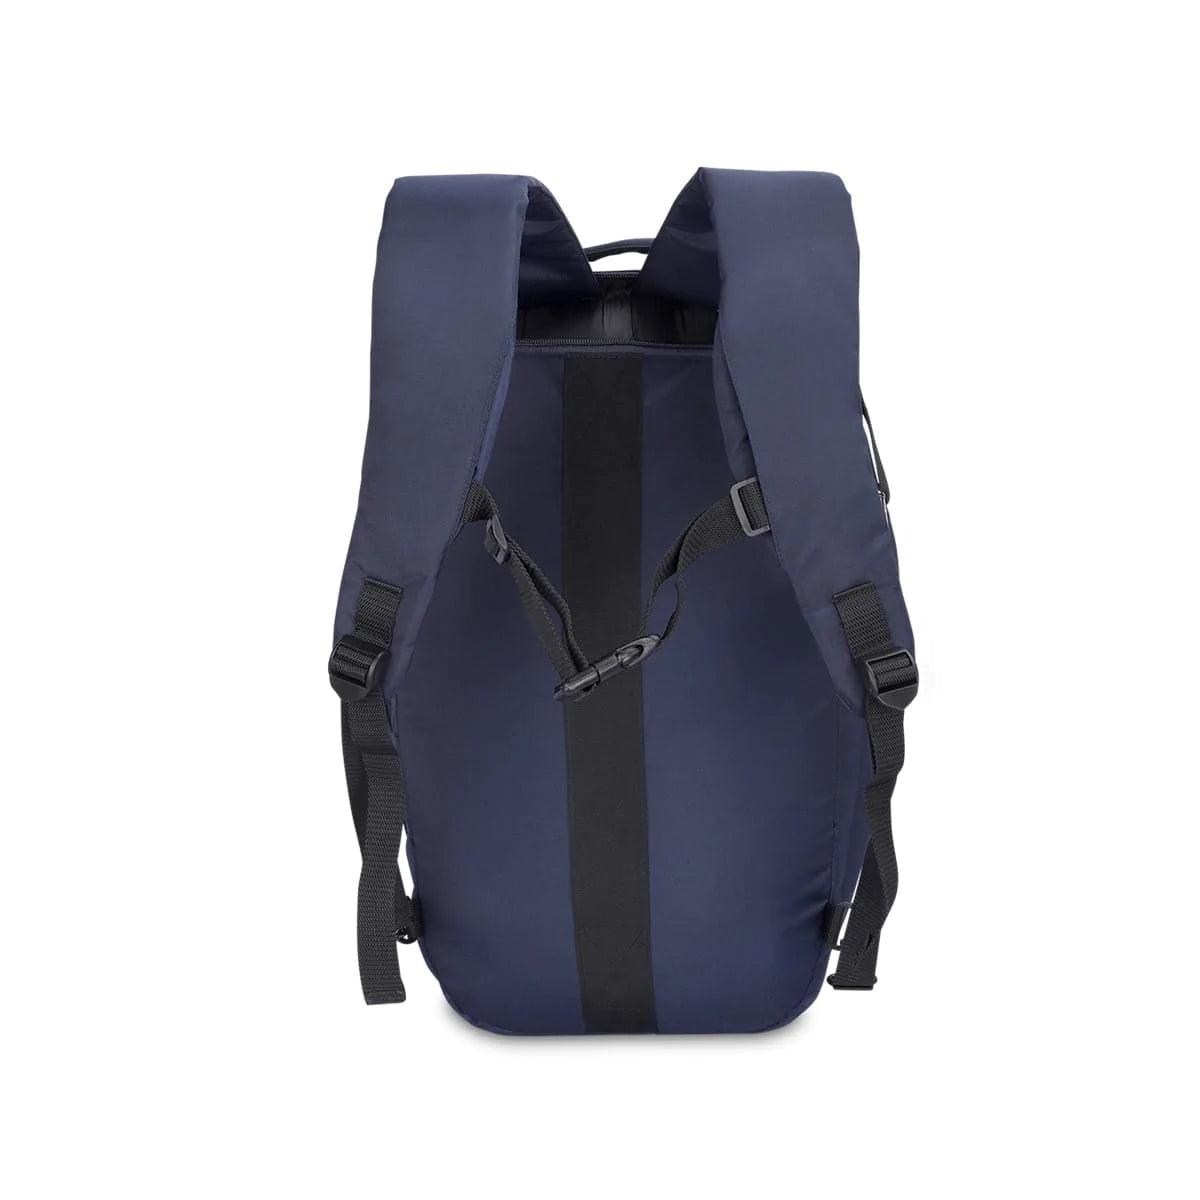 Navy | Protecta Proposed Merger Convertible Office Trave Laptop Backpack-3